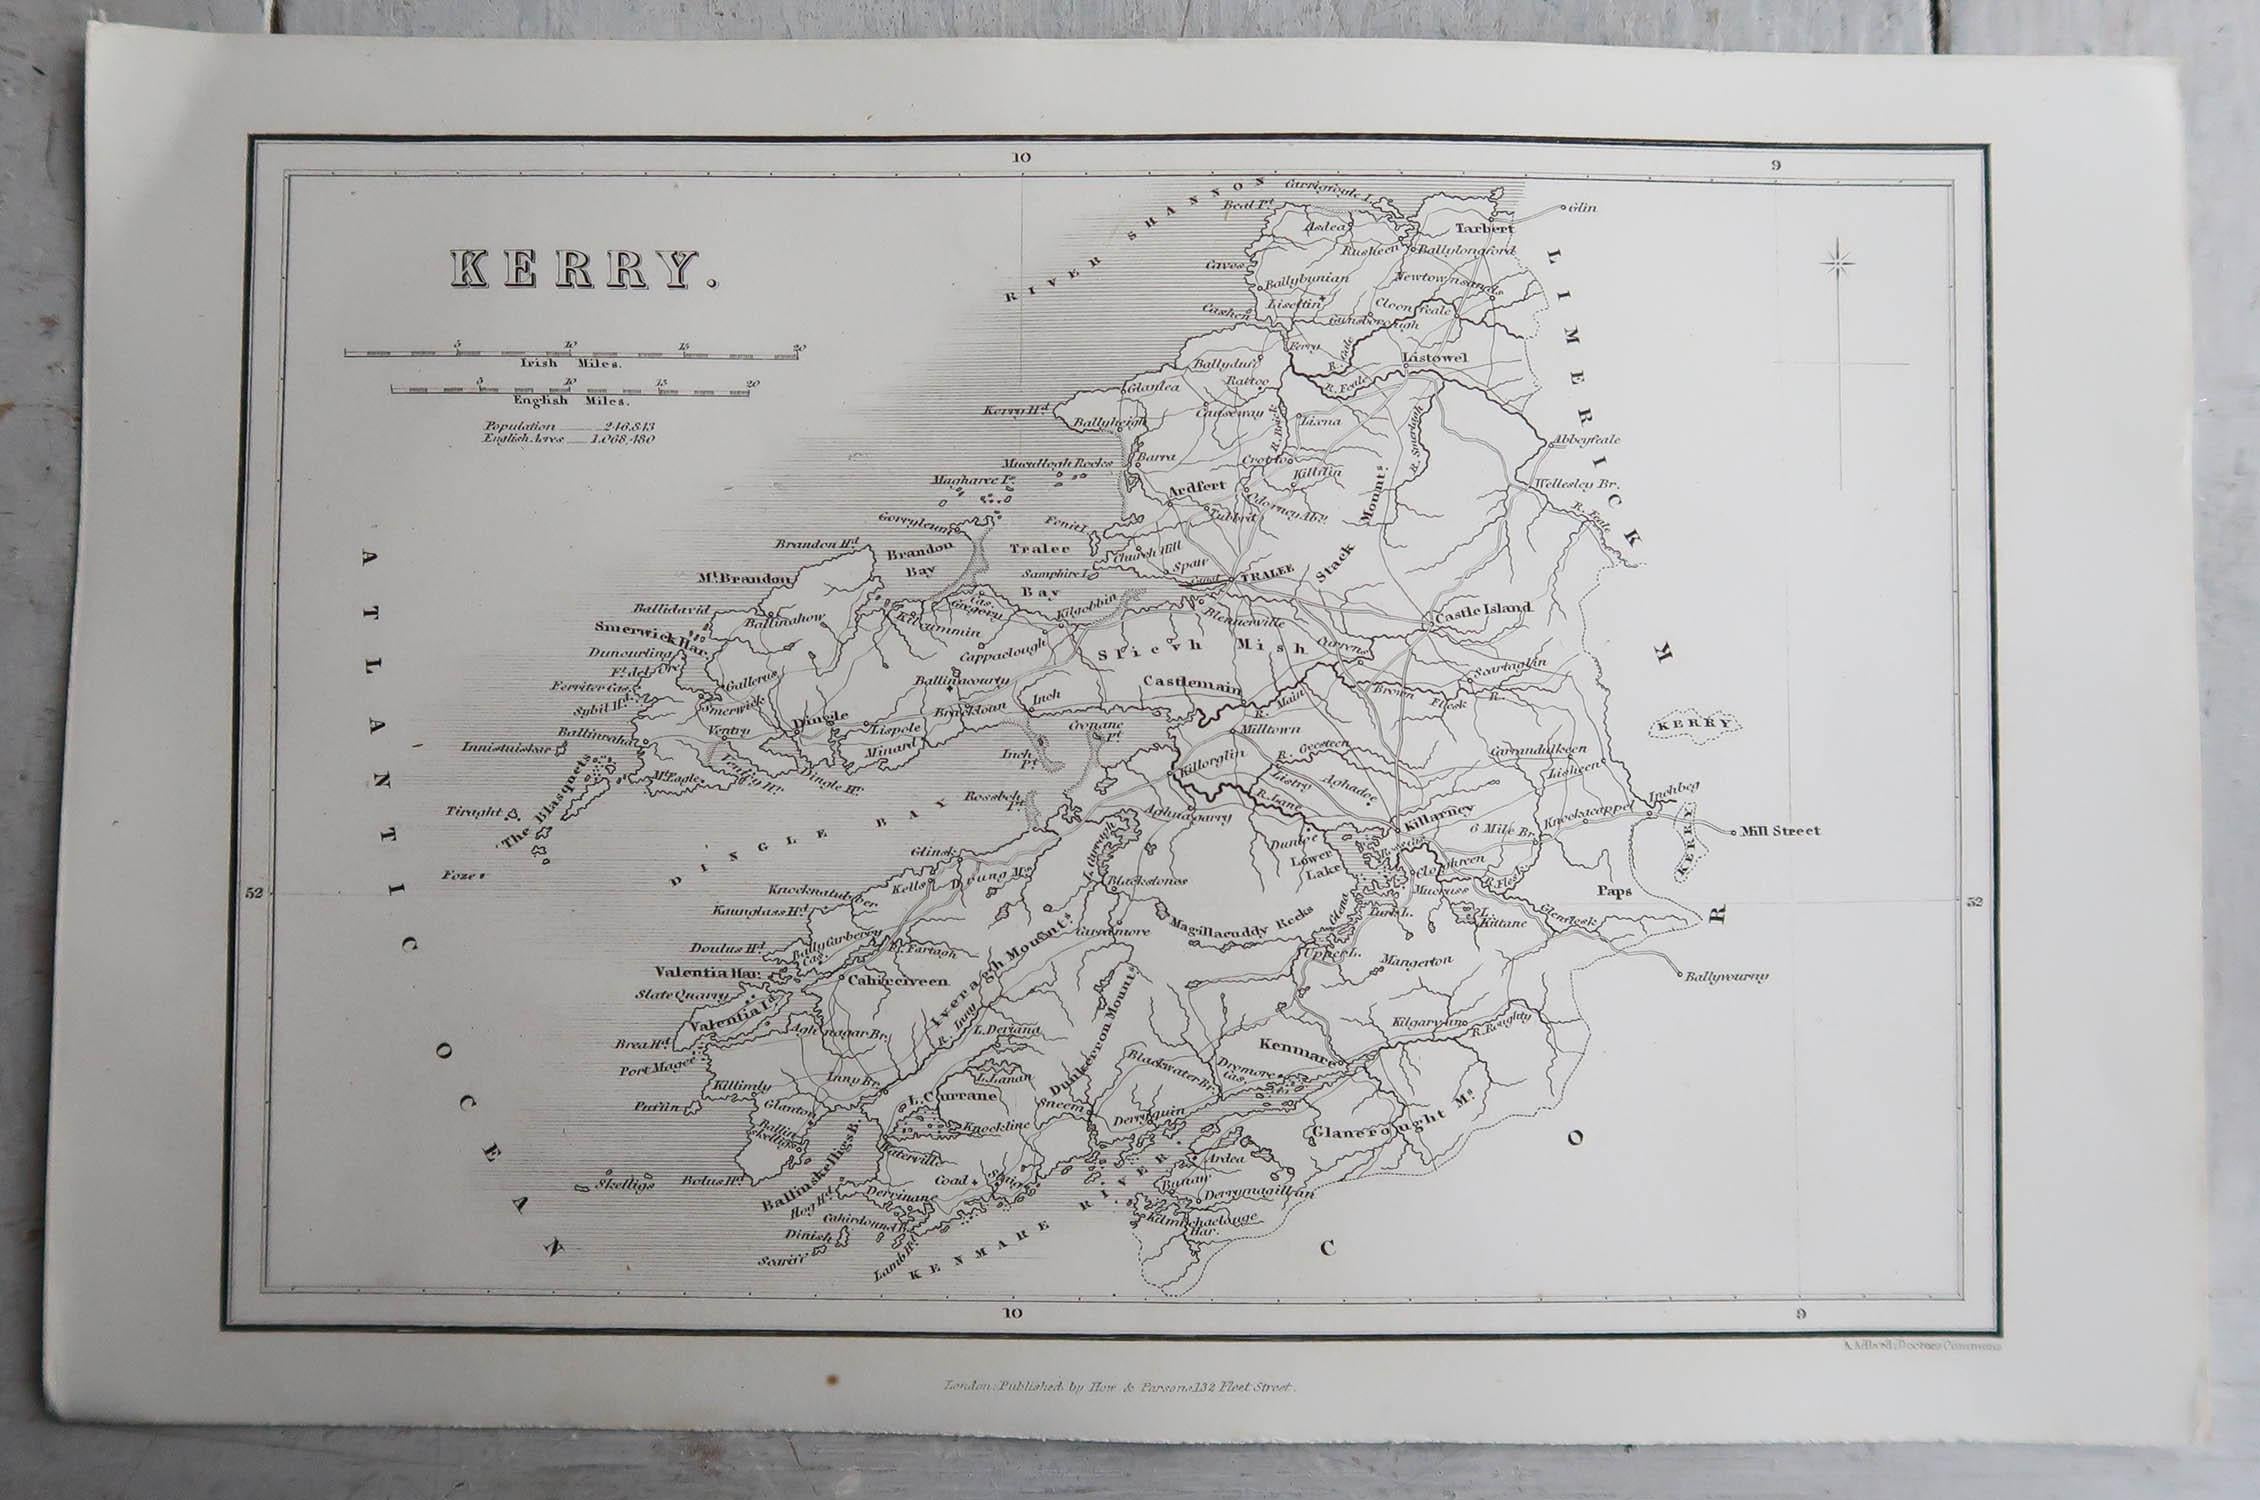 Other Original Antique Map of Ireland- Kerry. C.1840 For Sale